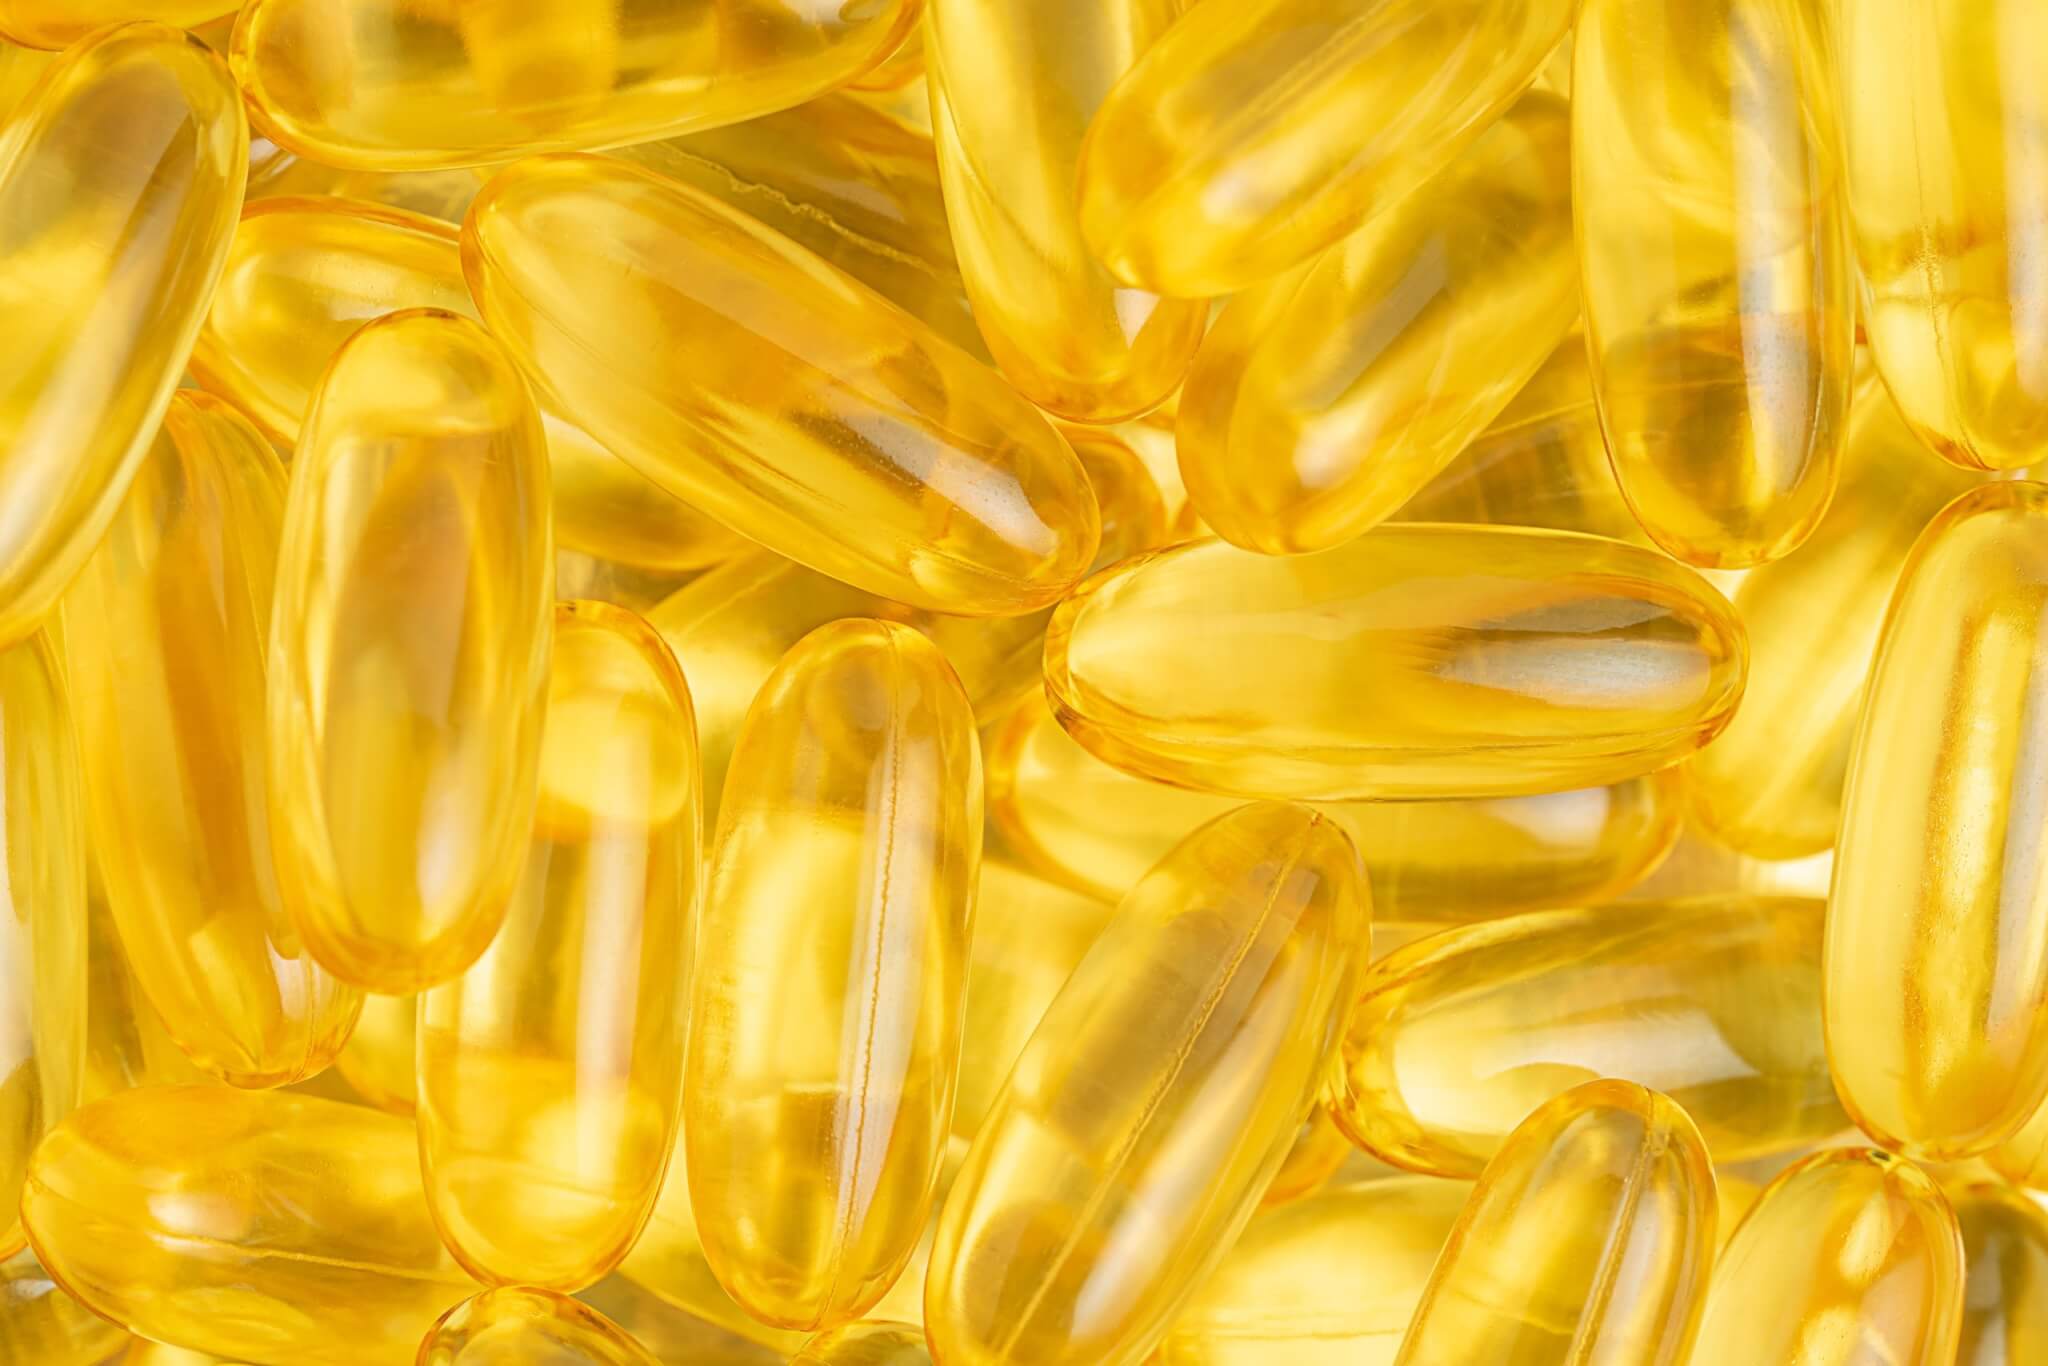 Revealed: many common omega-3 fish oil supplements are 'rancid', Fish oil